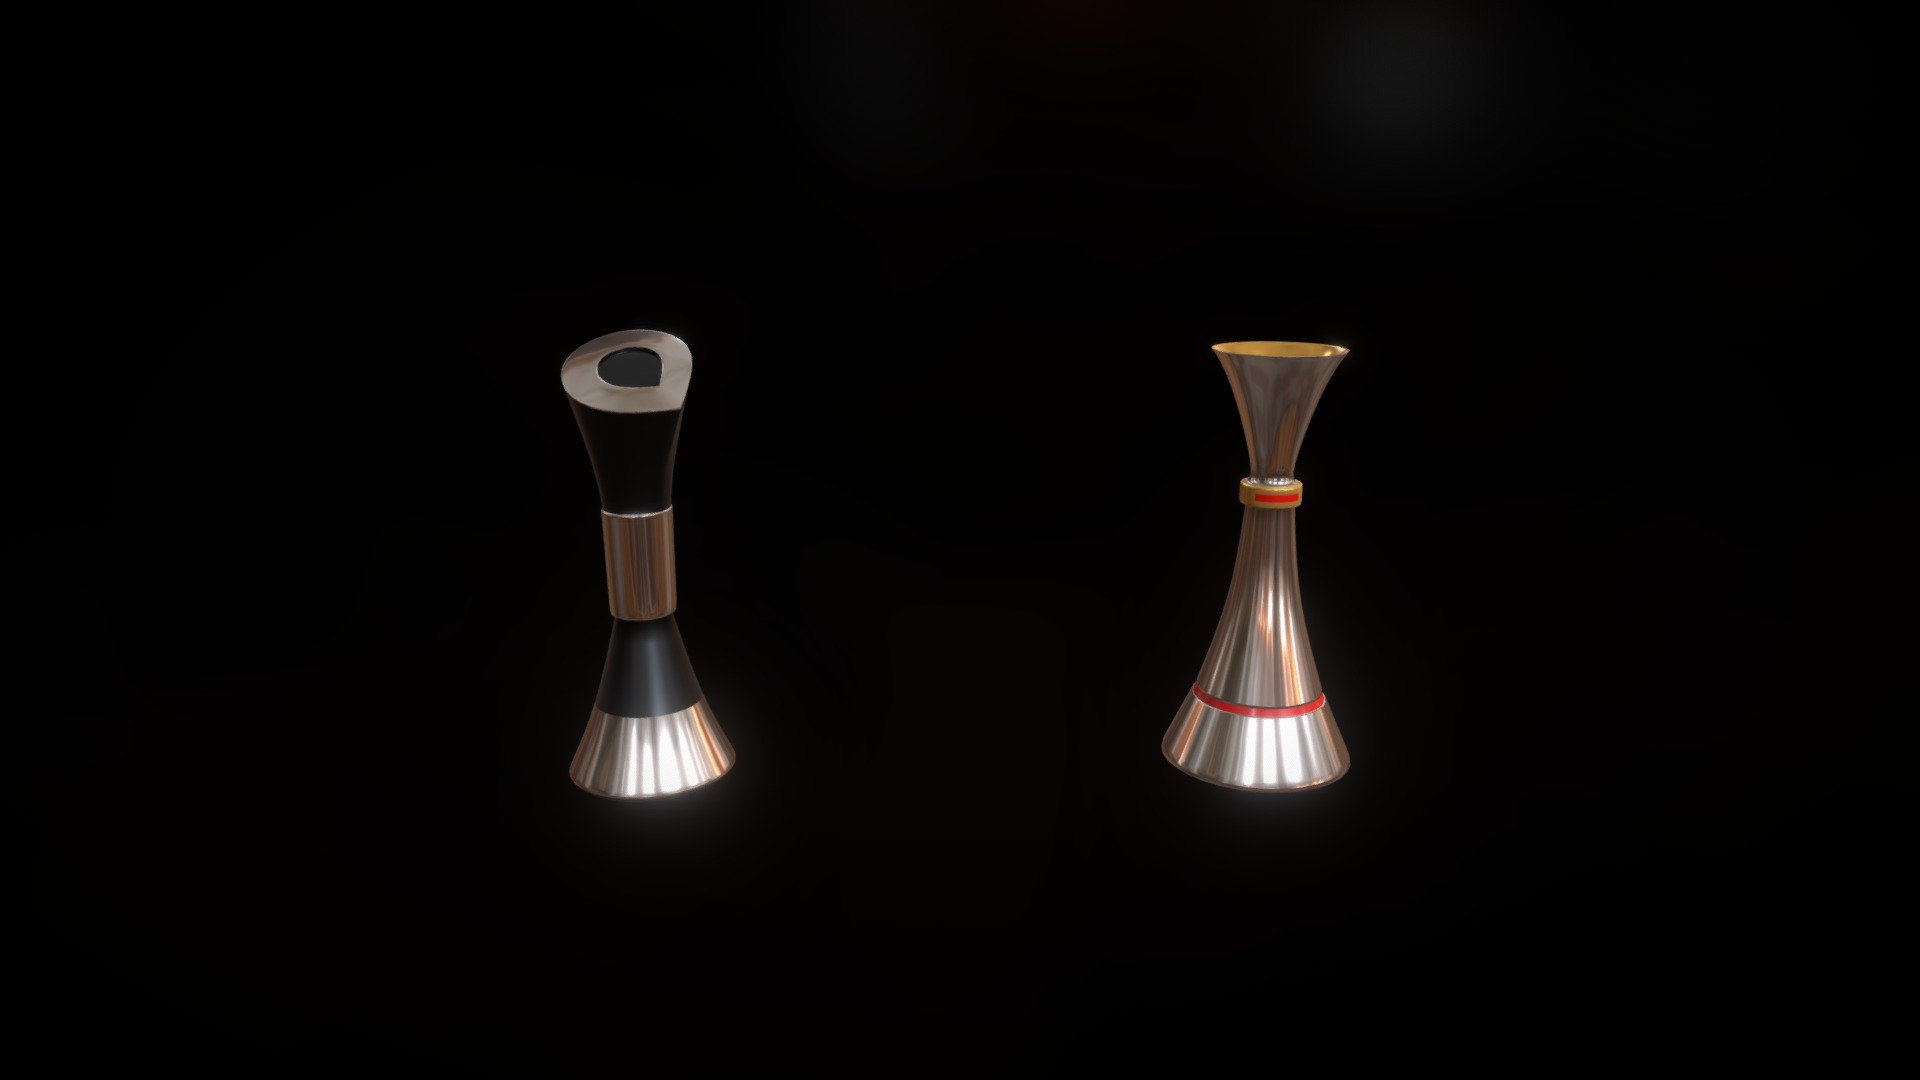 Sponsor Trophies awarded to the winners of various Grand Prix sponsored by Aramco in the Formula 1 Championship during the late 2010s and 2020s. Model comes in .blend .obj. .fbx file formats and Watertight .stl - F1 Trophy - Aramco Formula 1 Sponsor - Buy Royalty Free 3D model by Machine Meza (@maurib98) 3d model